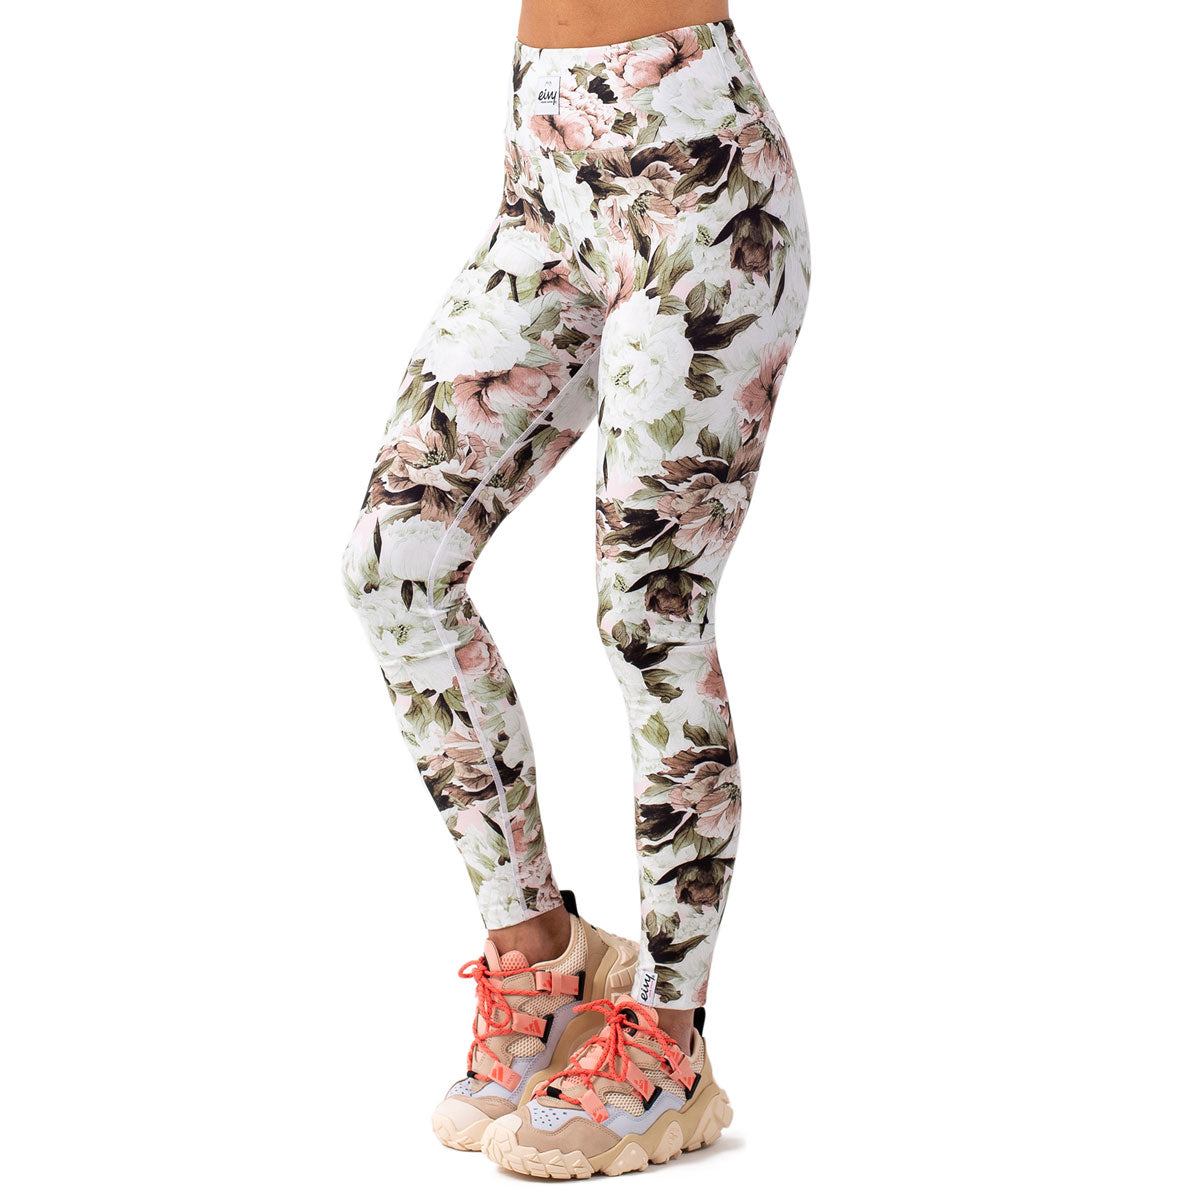 Eivy Icecold Tights Snowboard Base Layer - Bloom image 1